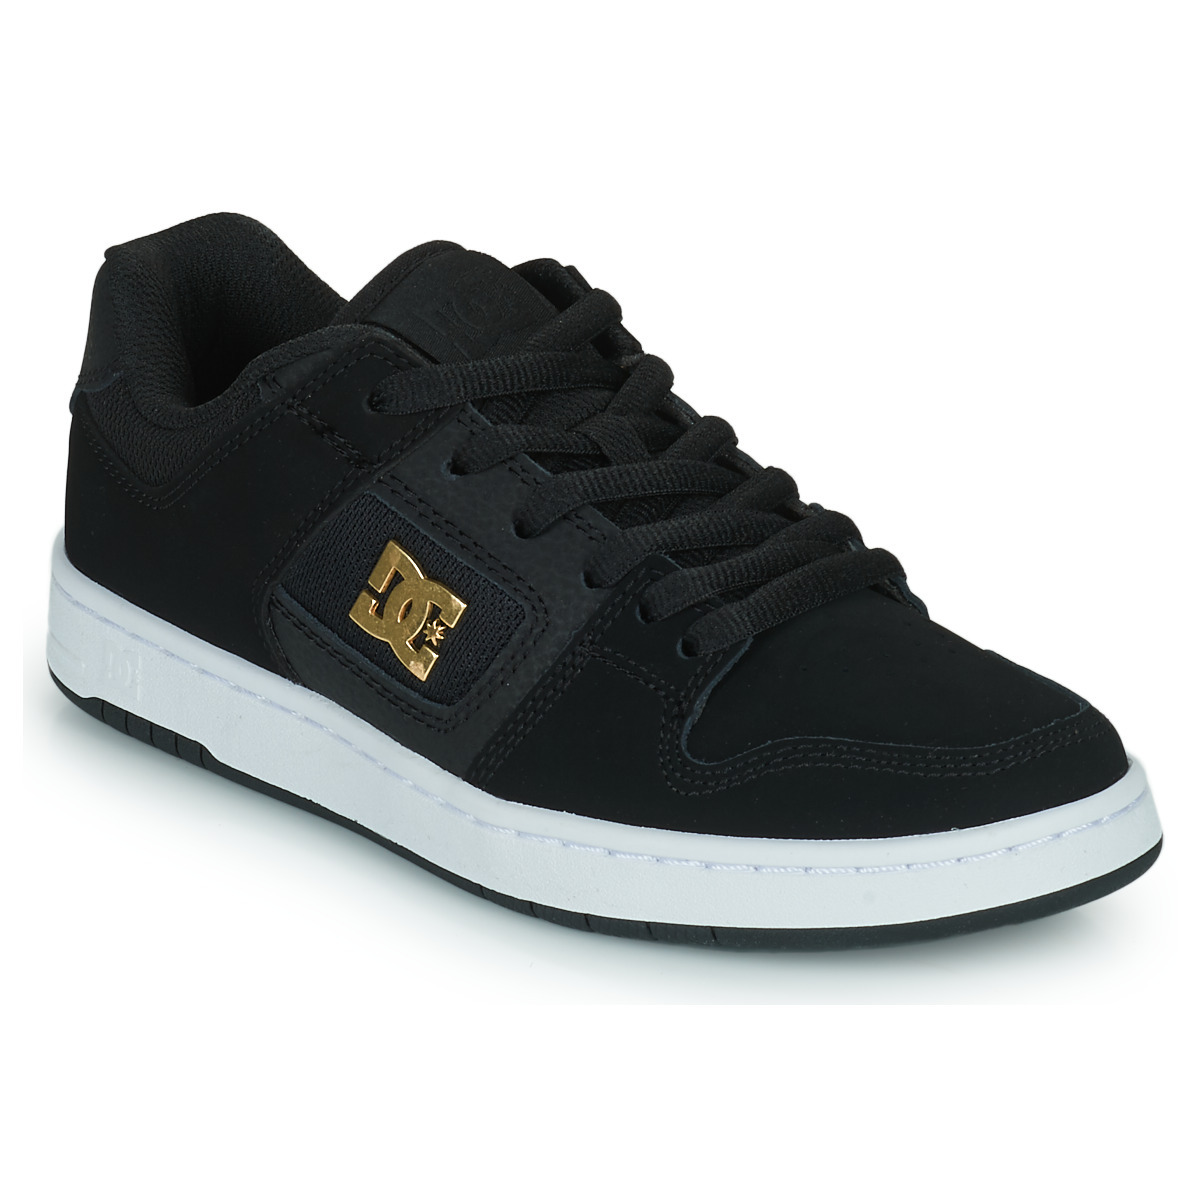 Black Sneakers Spartoo - Dc Shoes GOOFASH